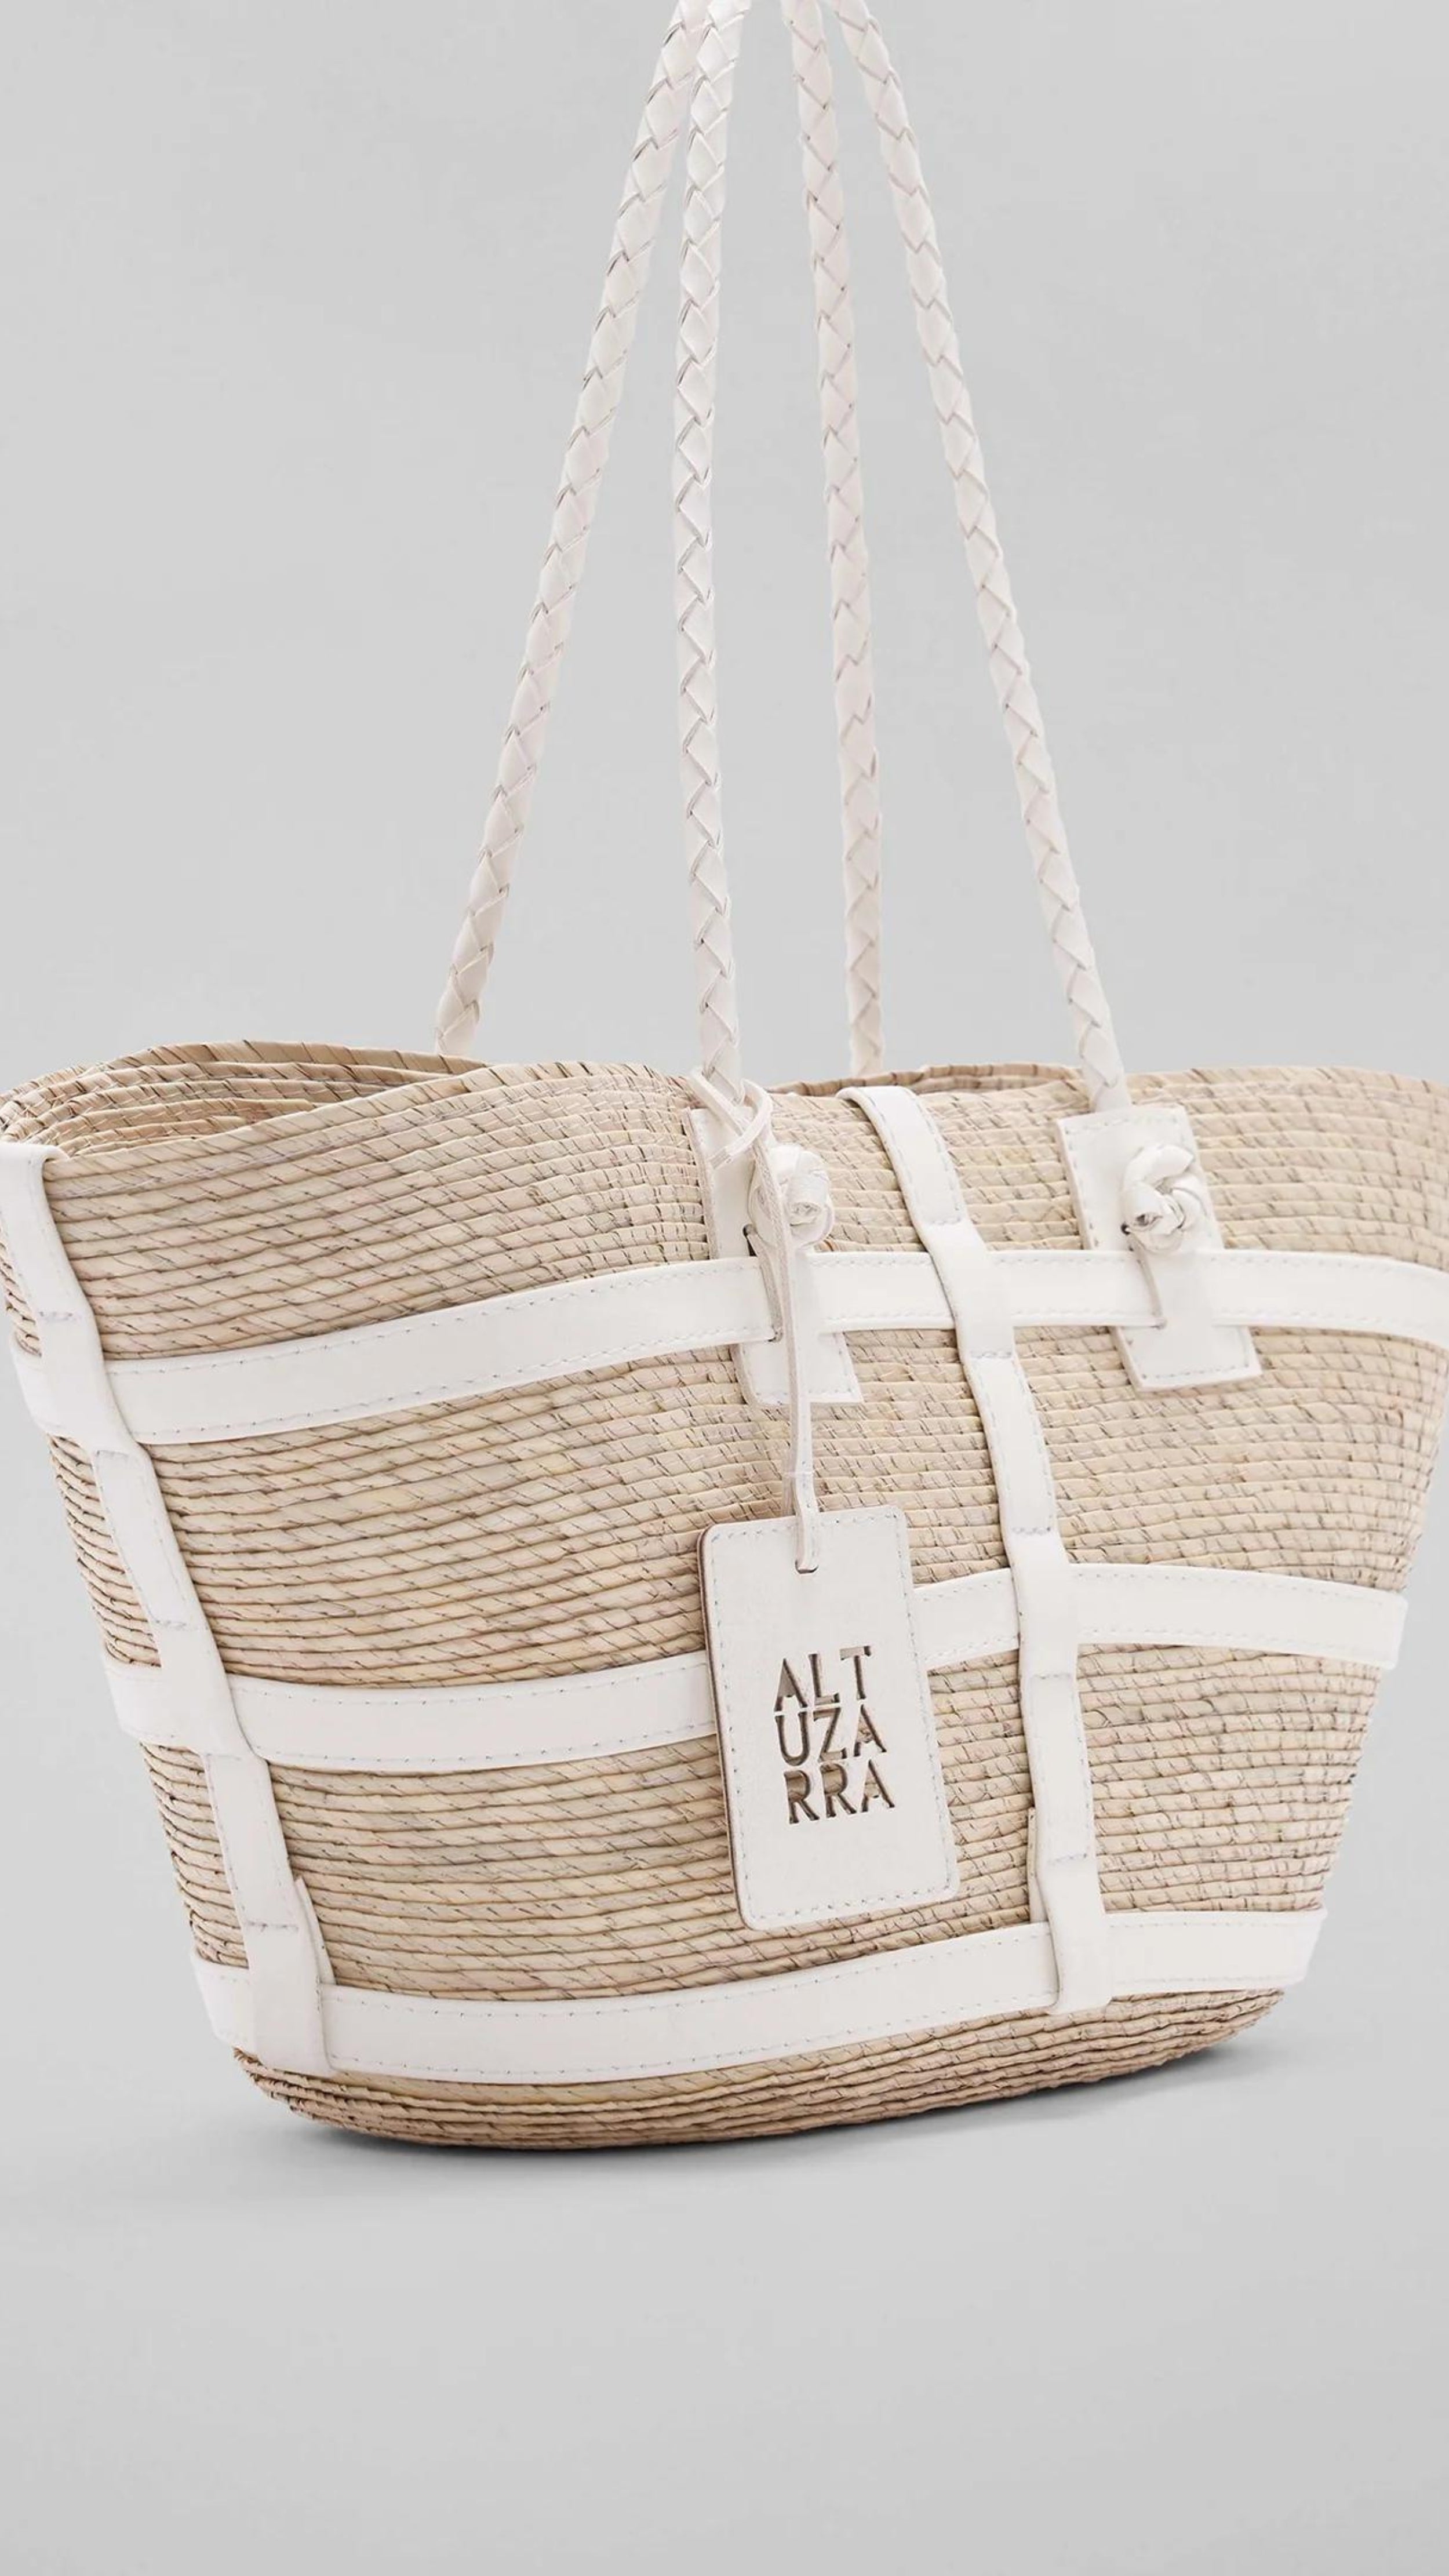 Altuzara Watermill Bag Small in White. Crafted in Mexico from natural palm fibers and detailed with soft white leather. The hand straps are braided leather and it comes with a laser cut detailed Altuzarra hang tag. This photo shows the full bag bag from a slight angle.